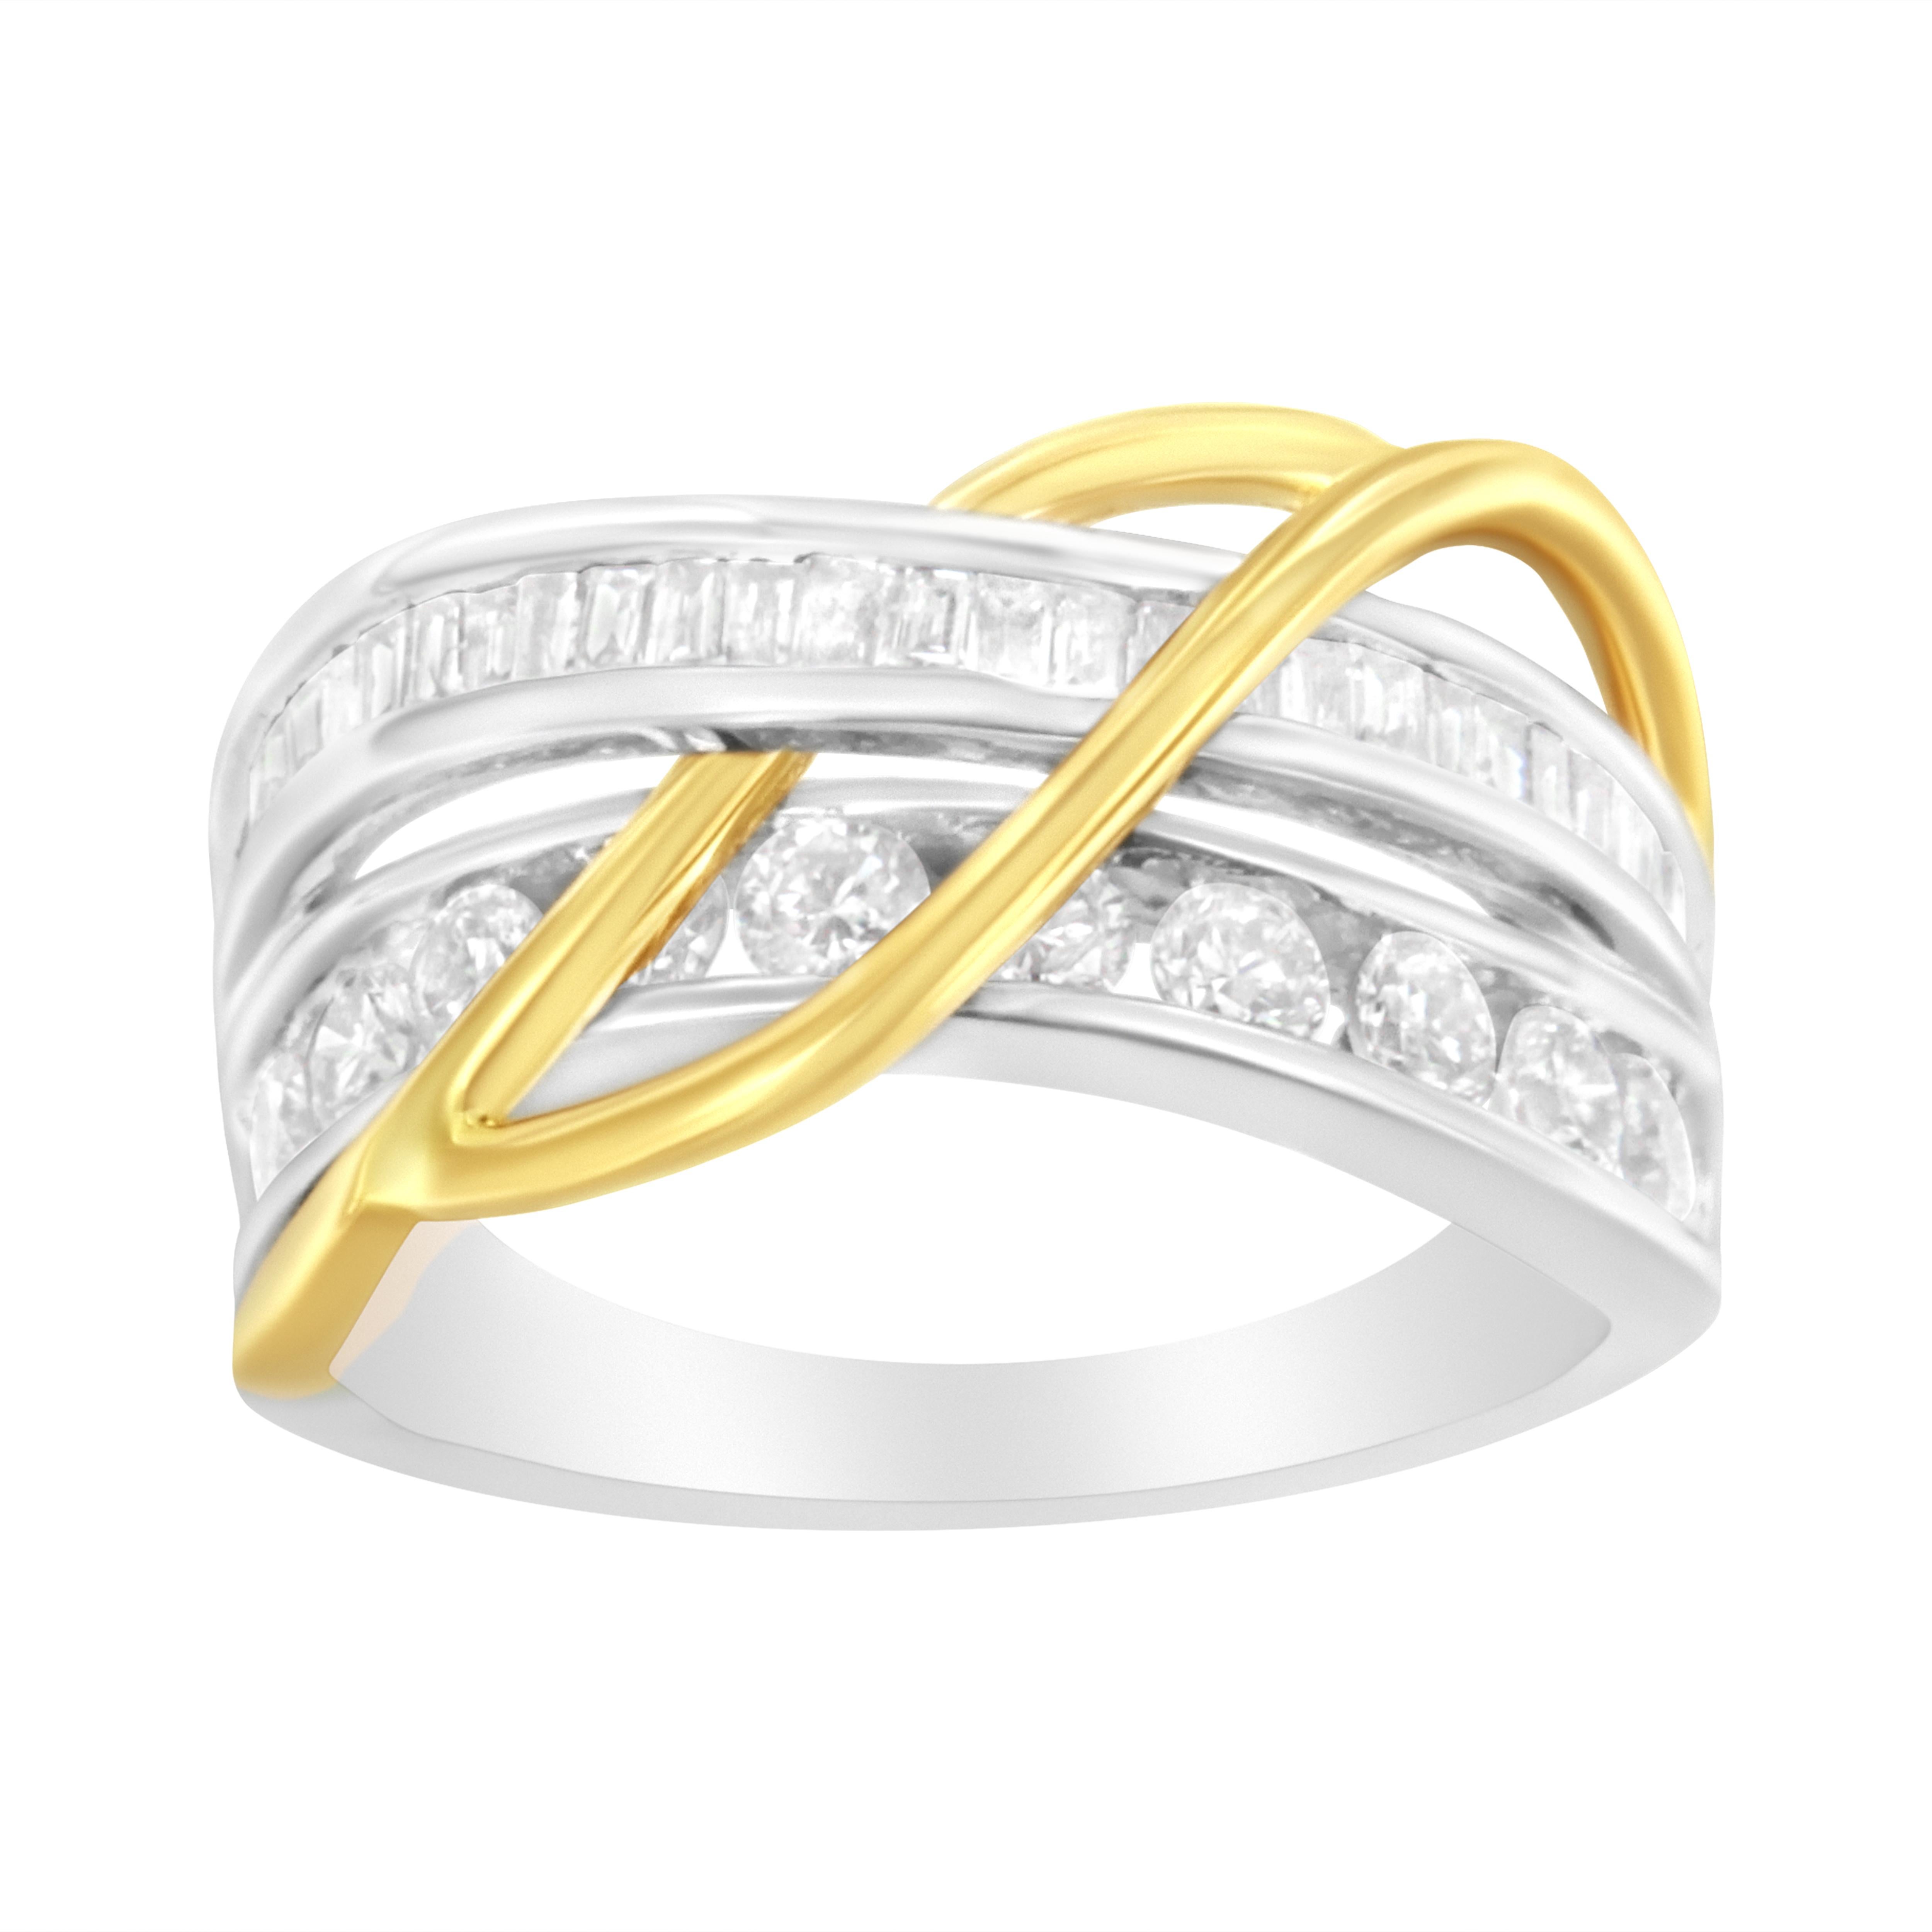 Bold and unique, this ring is fashioned in 10k white and yellow gold. 1 1/10ct TDW of diamonds are displayed in this design. A cool white gold ring band splits and is inlaid with a row of glittering baguette diamonds and one row of round cut